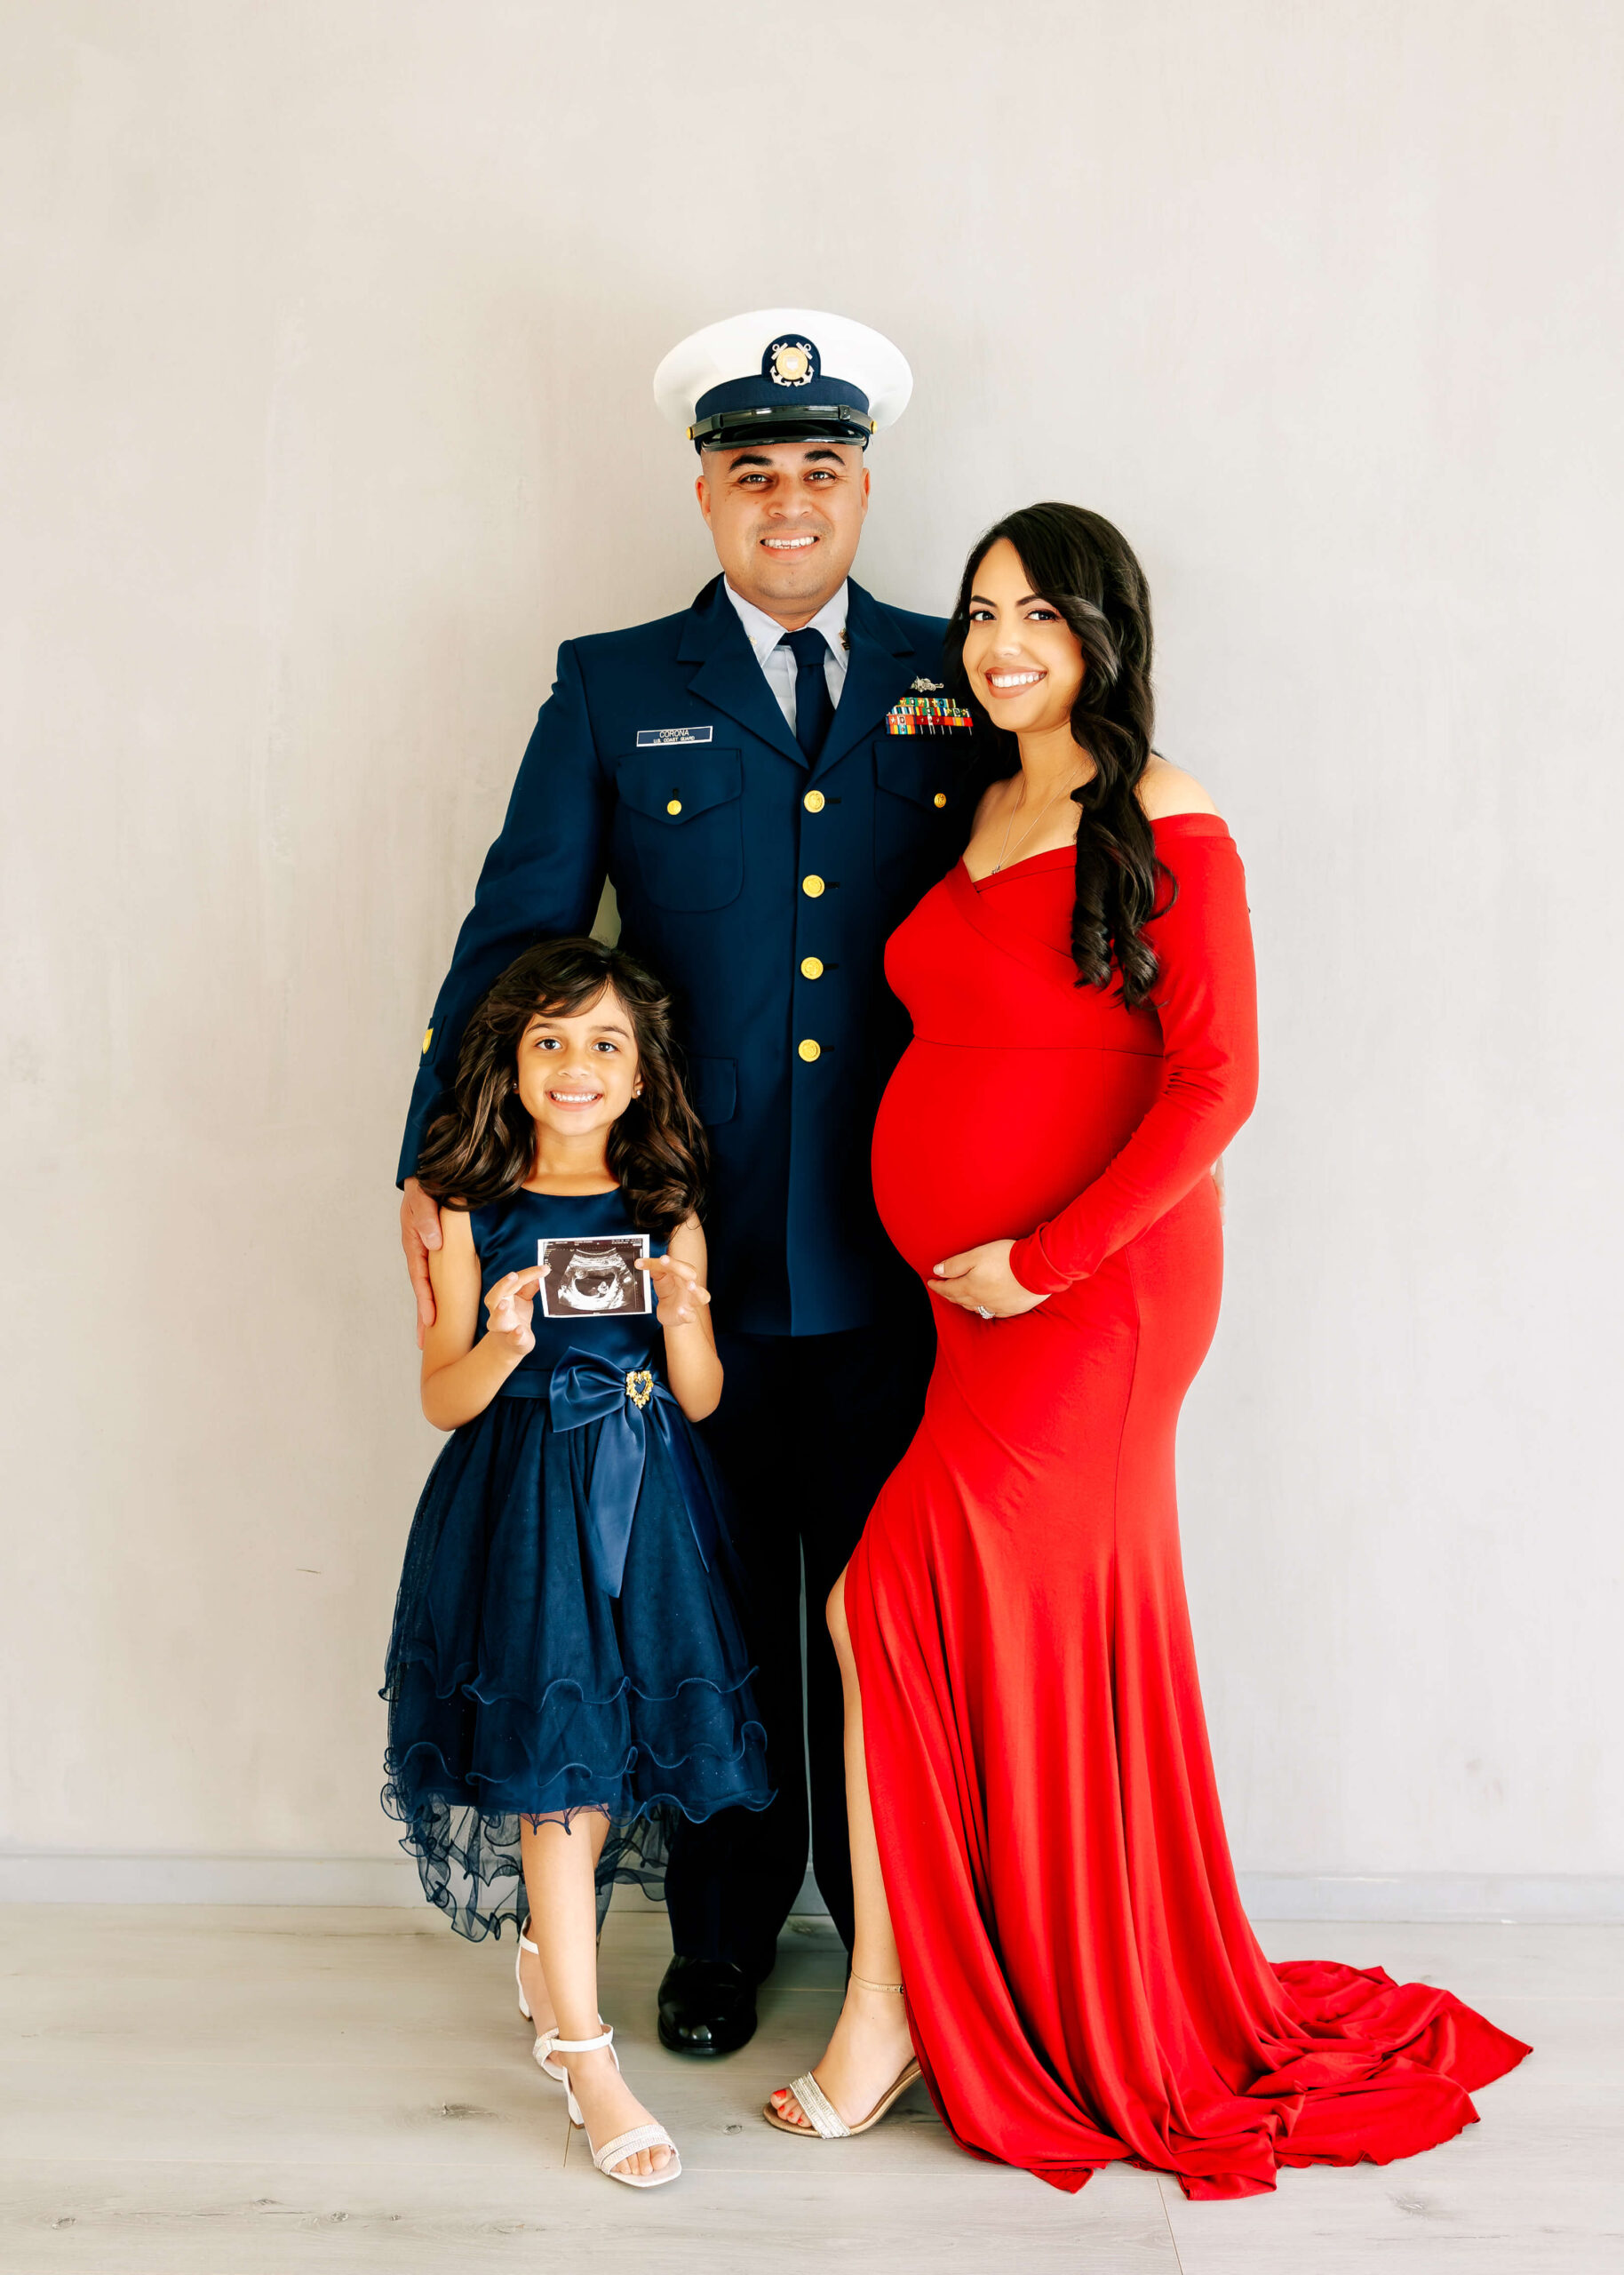 Husband and wife posed with their first child during maternity session in studio by Ashley Nicole in Orange County, Ca.